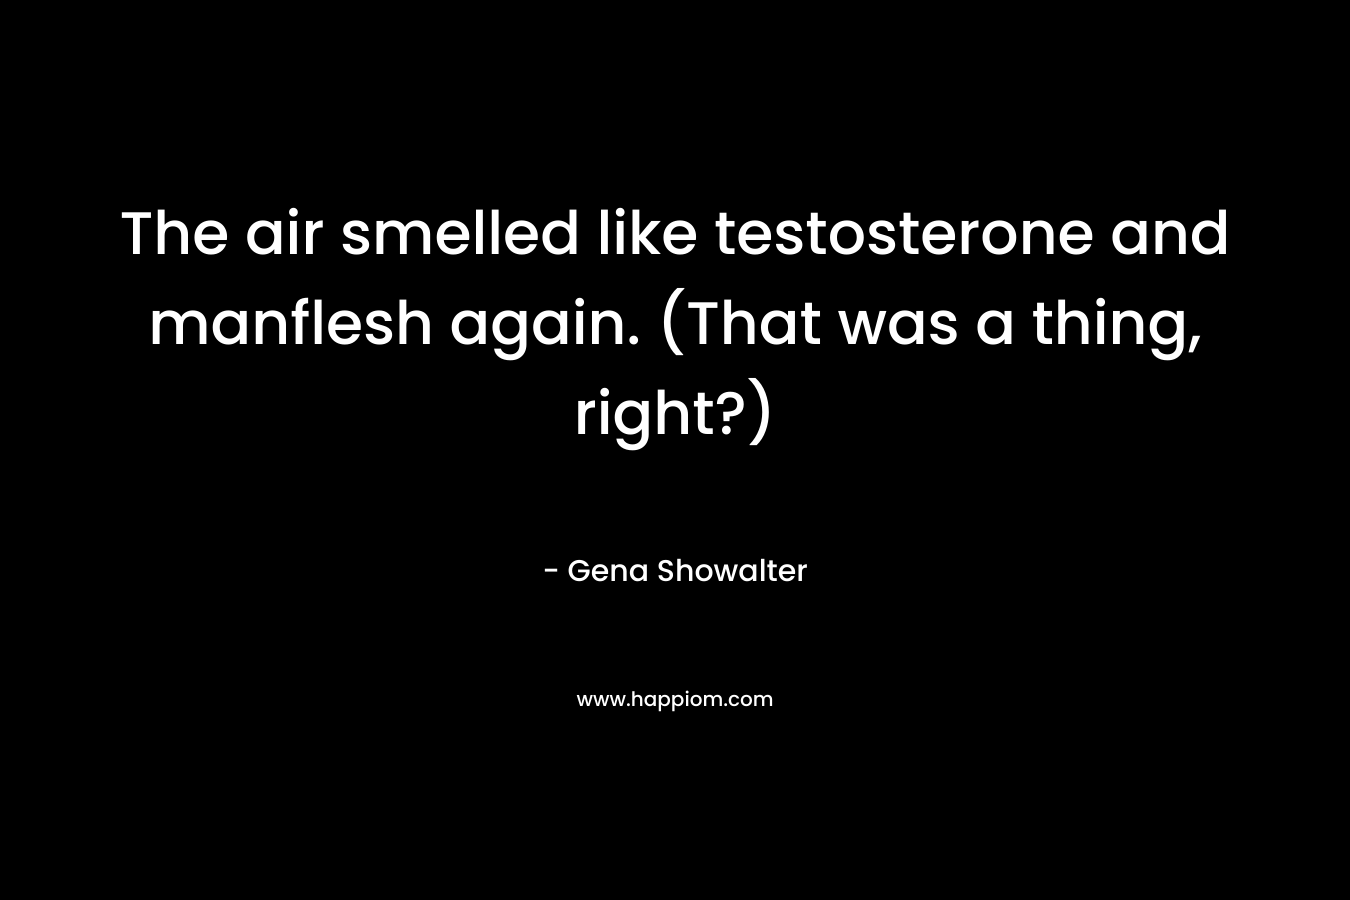 The air smelled like testosterone and manflesh again. (That was a thing, right?)